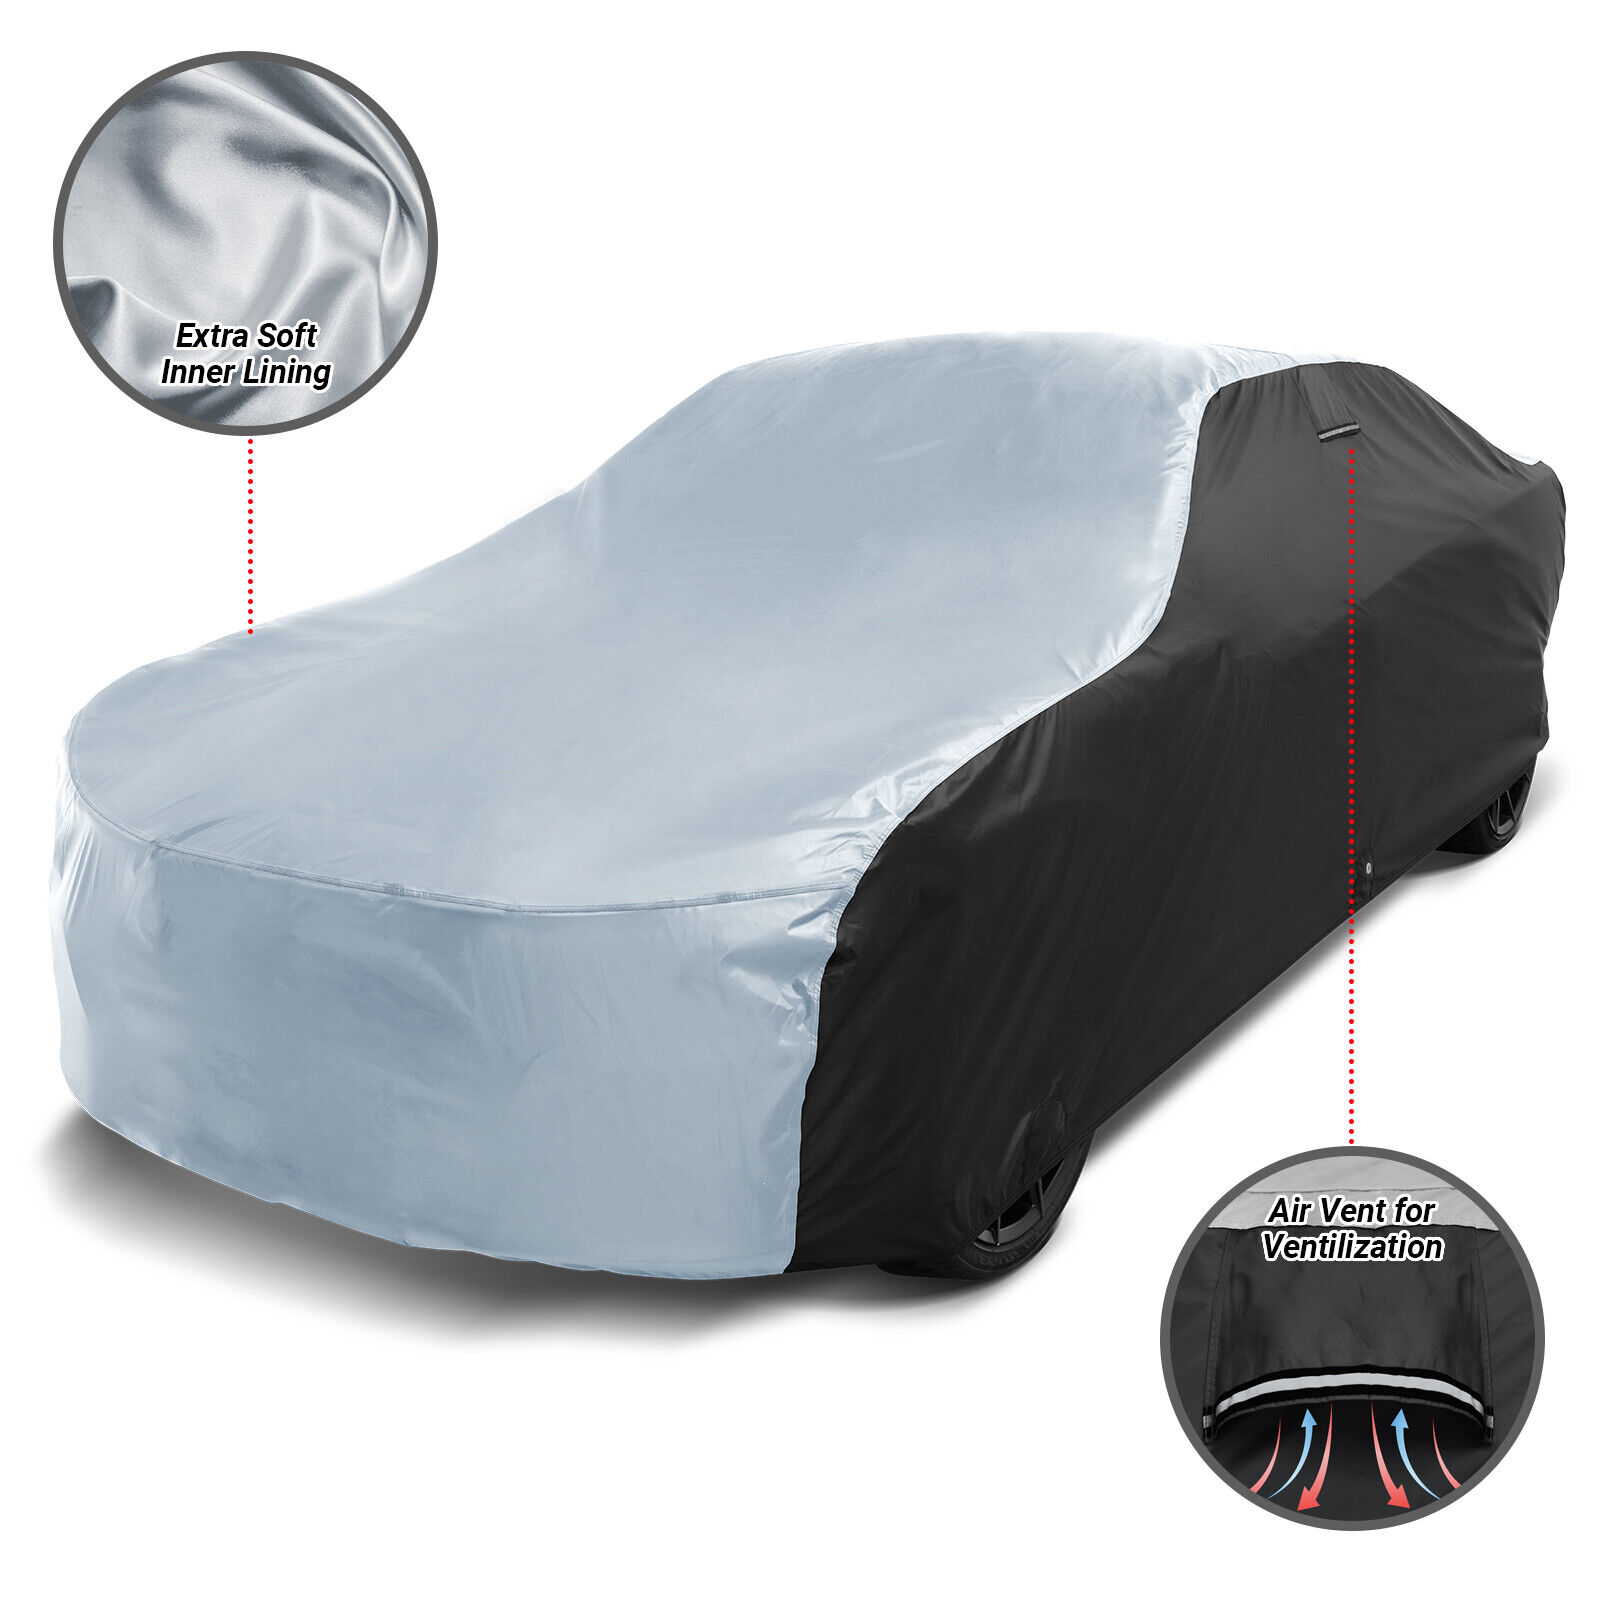 For PLYMOUTH [FURY] Custom-Fit Outdoor Waterproof All Weather Best Car Cover